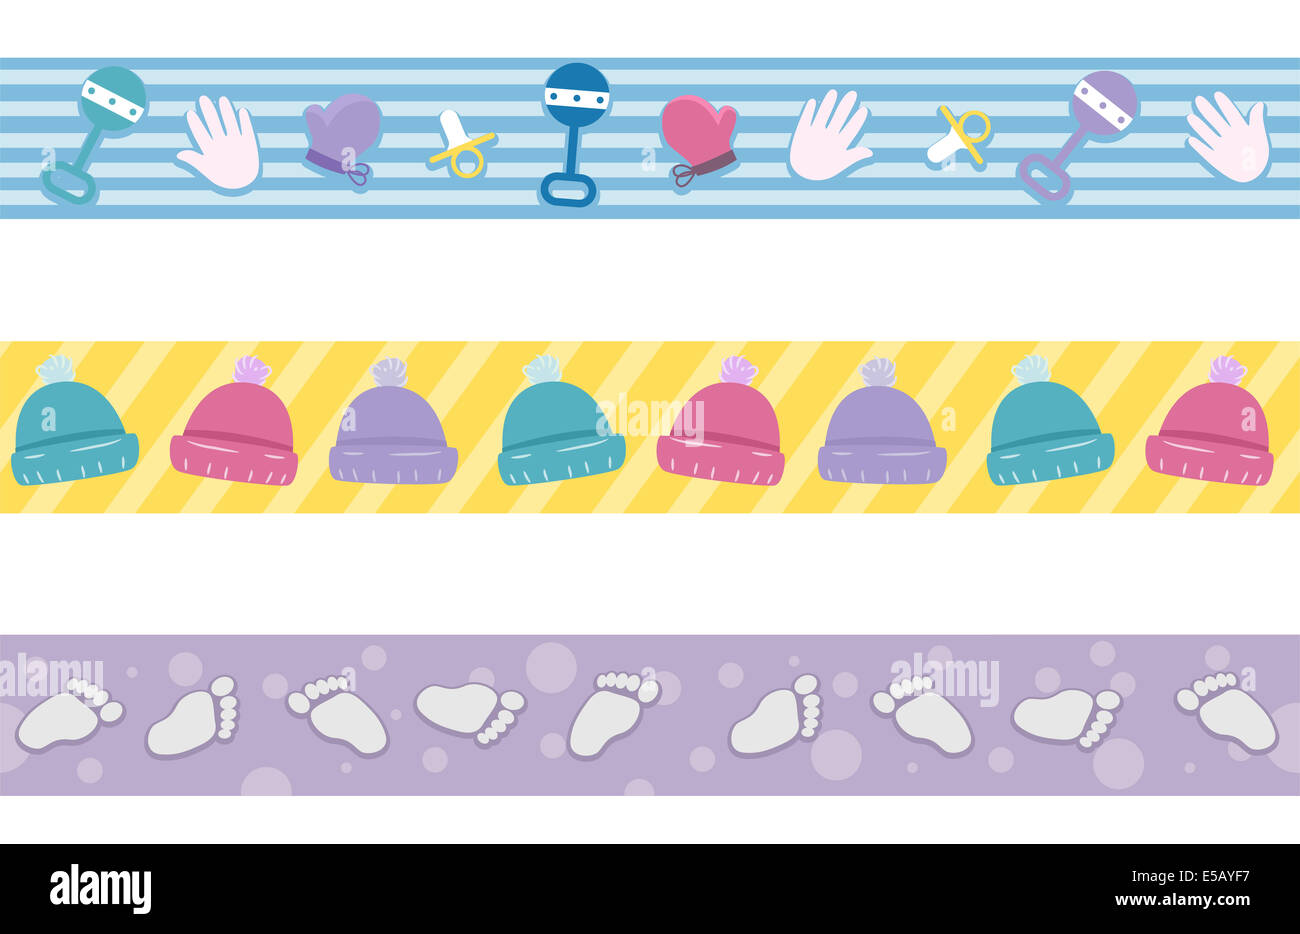 Border Illustration Featuring Different Elements Commonly Associated with Babies Stock Photo